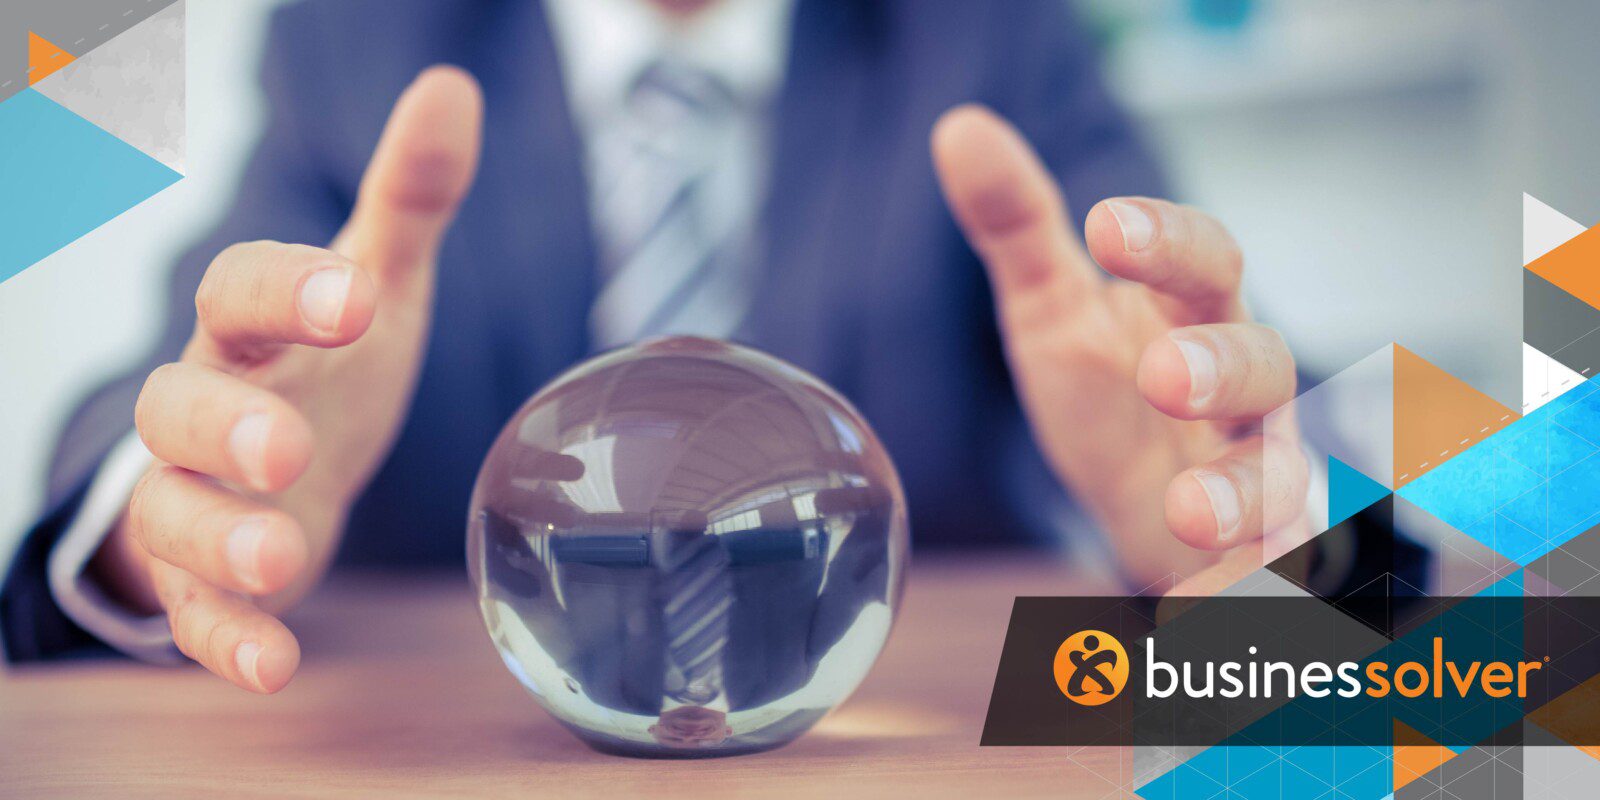 No Crystal Ball Necessary – Here’s What Employees are Thinking, but Not Saying